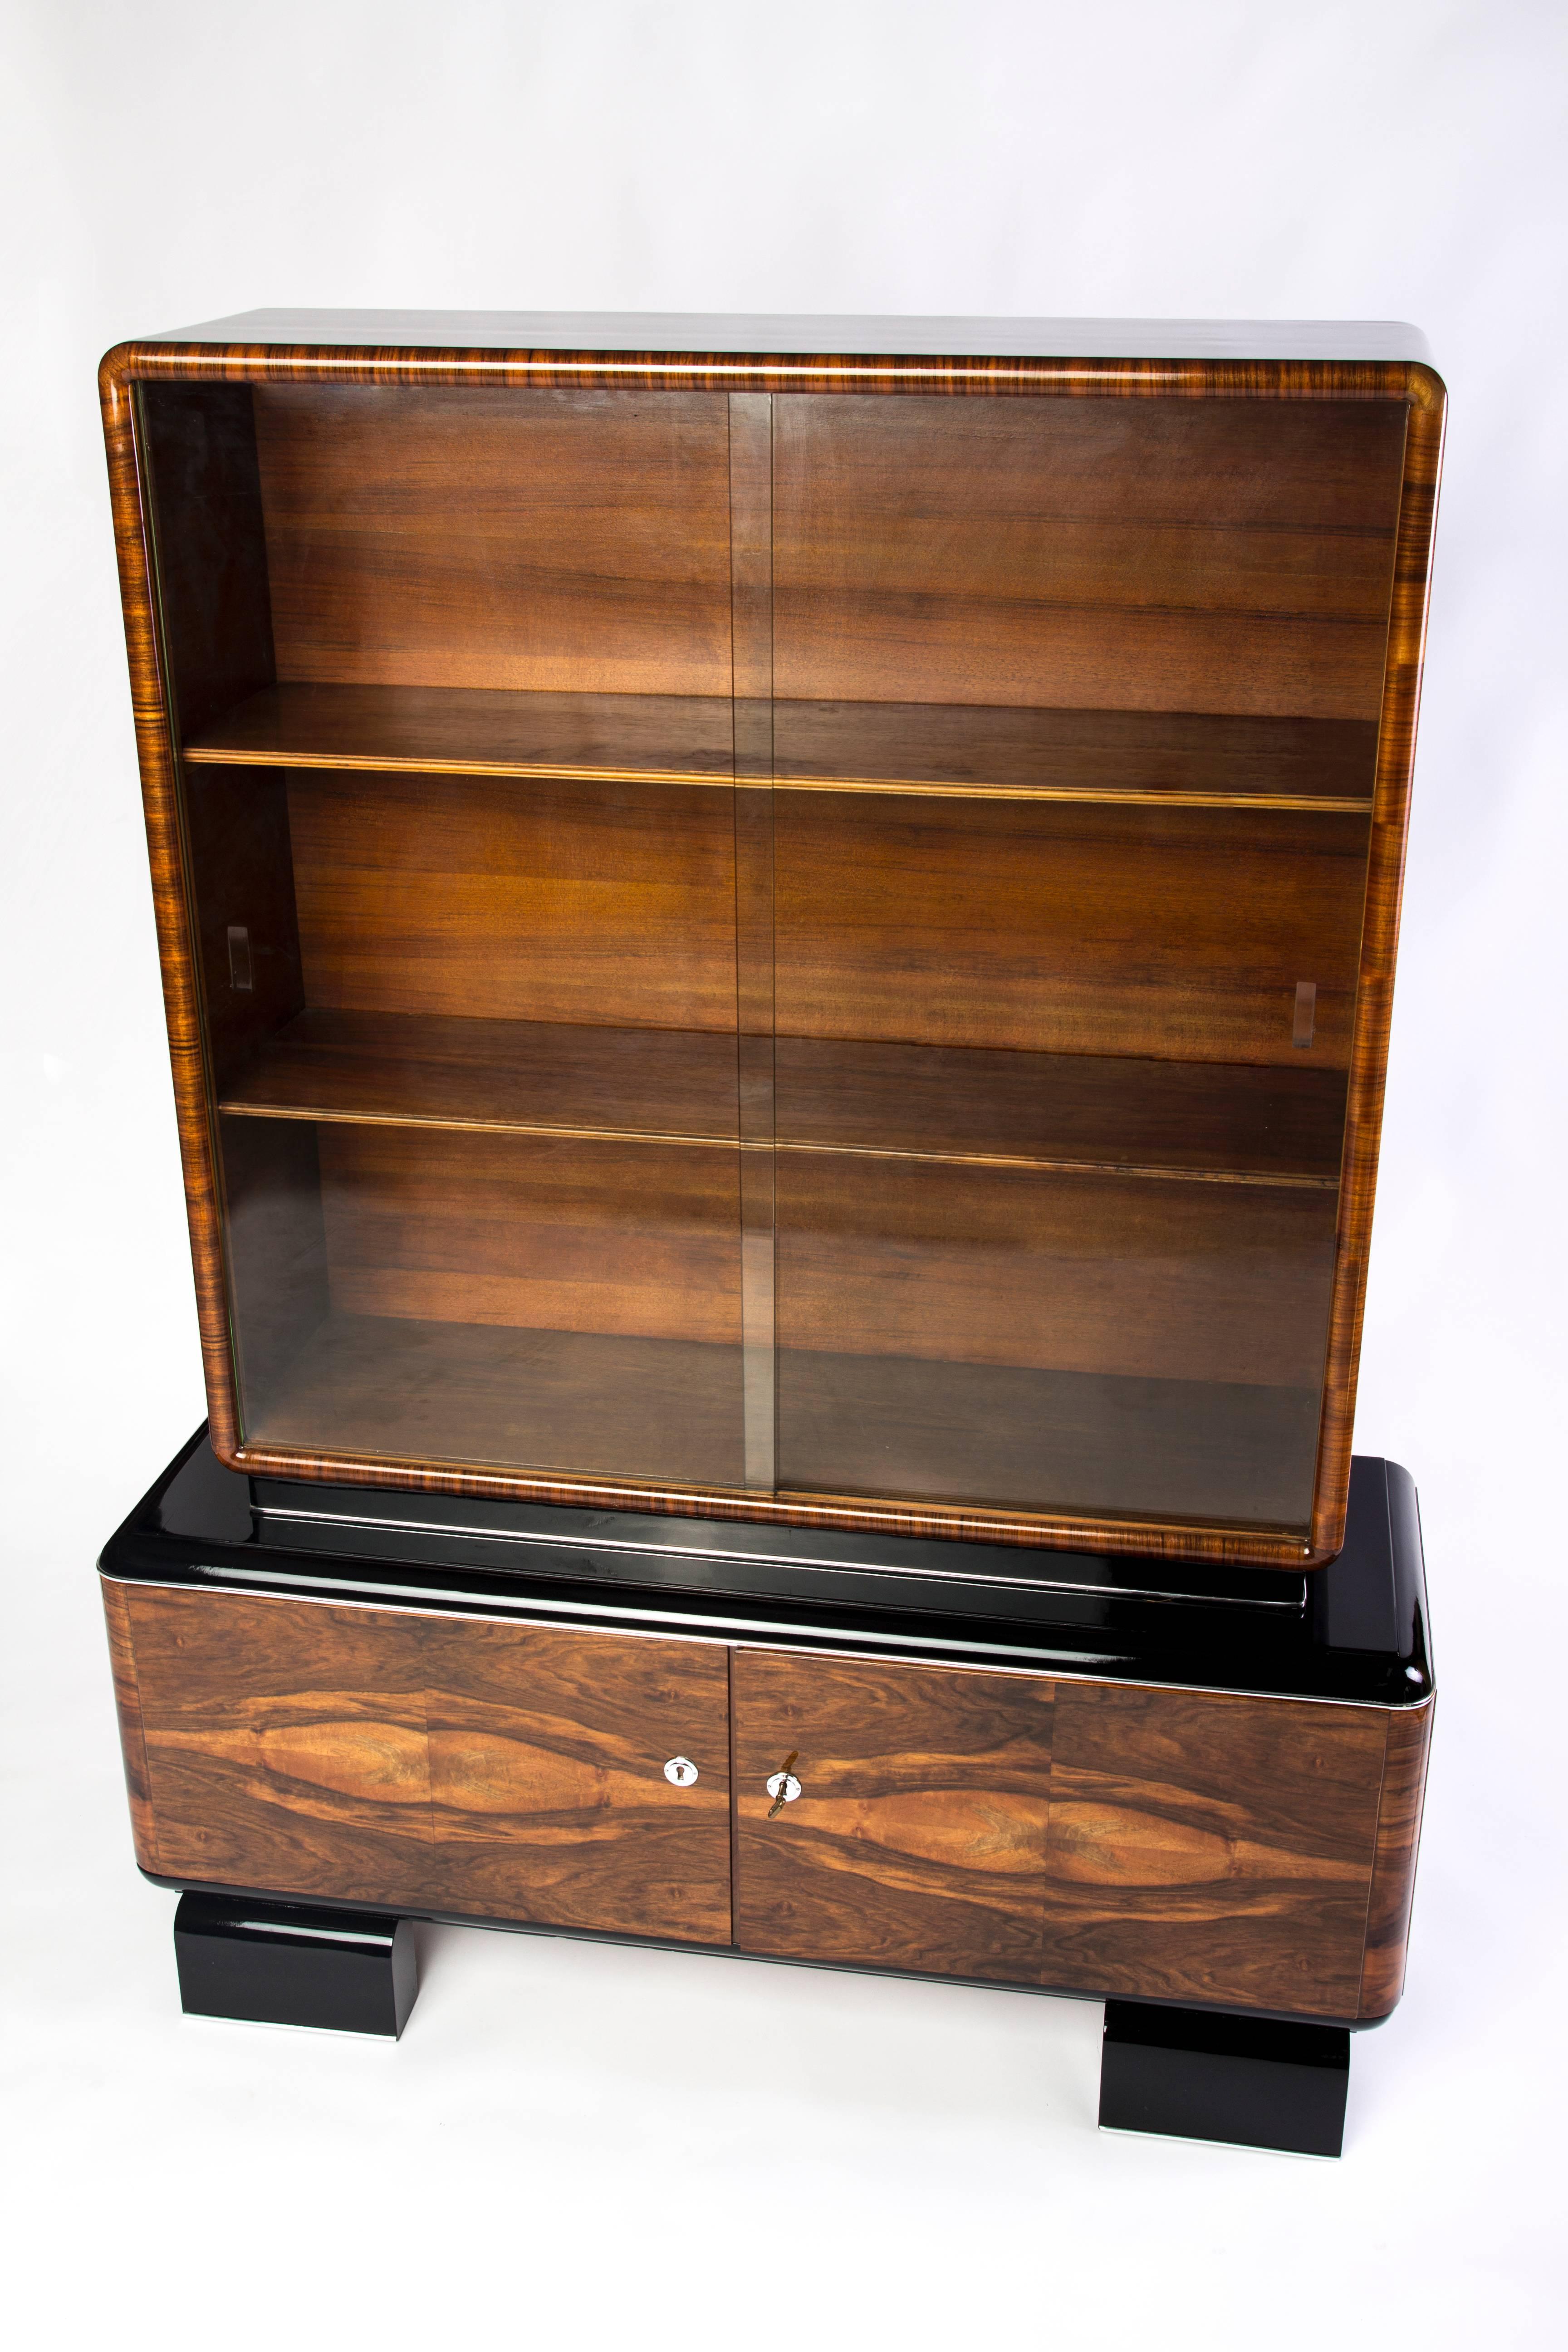 This magnificent Art Deco display case features hand polished burled wood, two (2) swing doors, and a high gloss black lacquer finished side panels and feet. The vitrine compartment features two (2) wooden shelves covered by a set of sliding